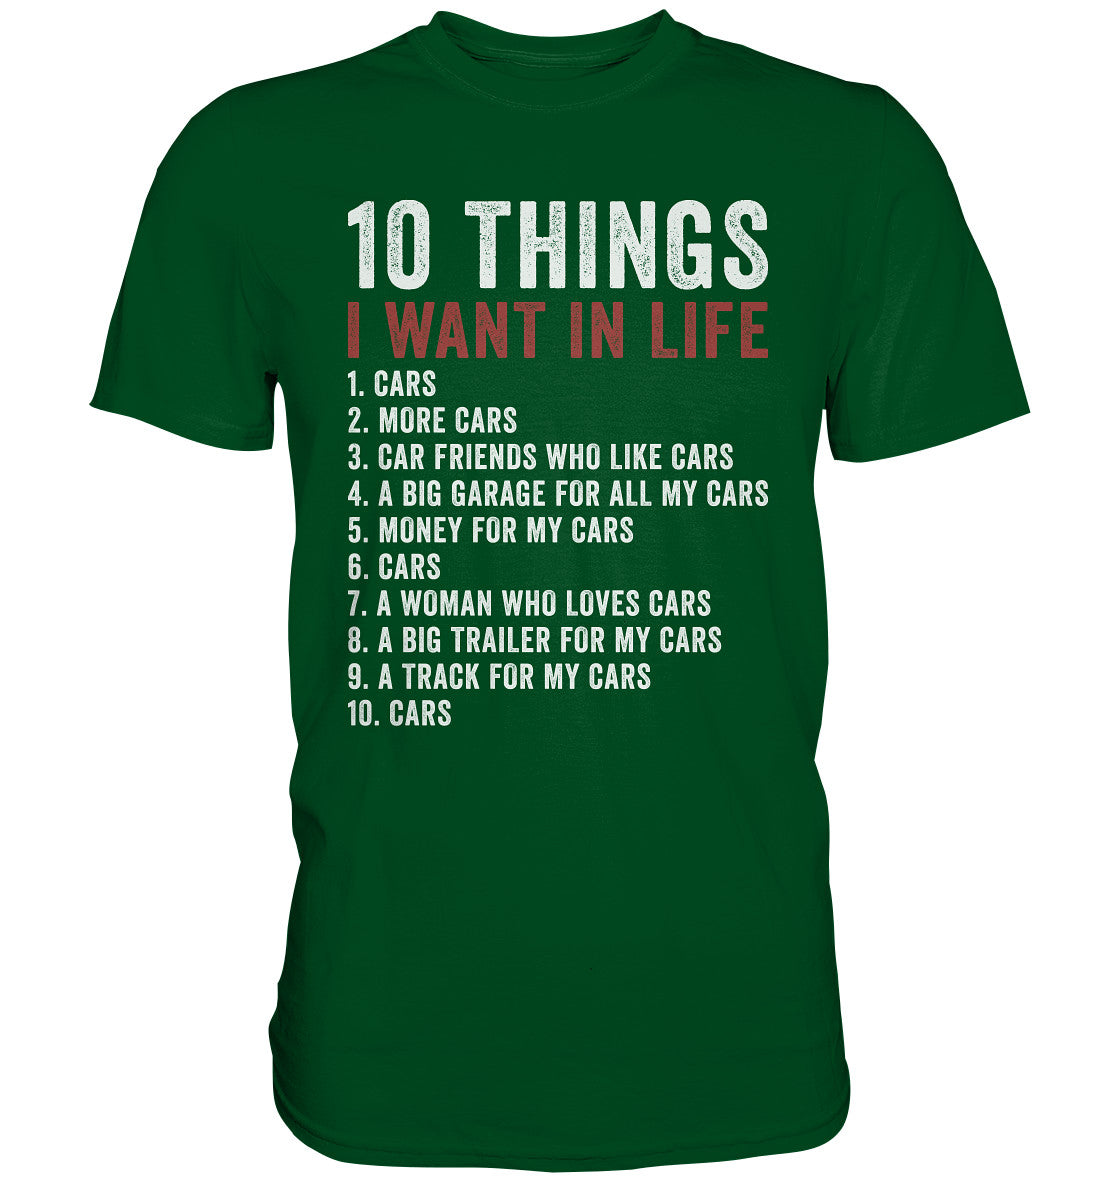 10 things I want in life - Premium Shirt